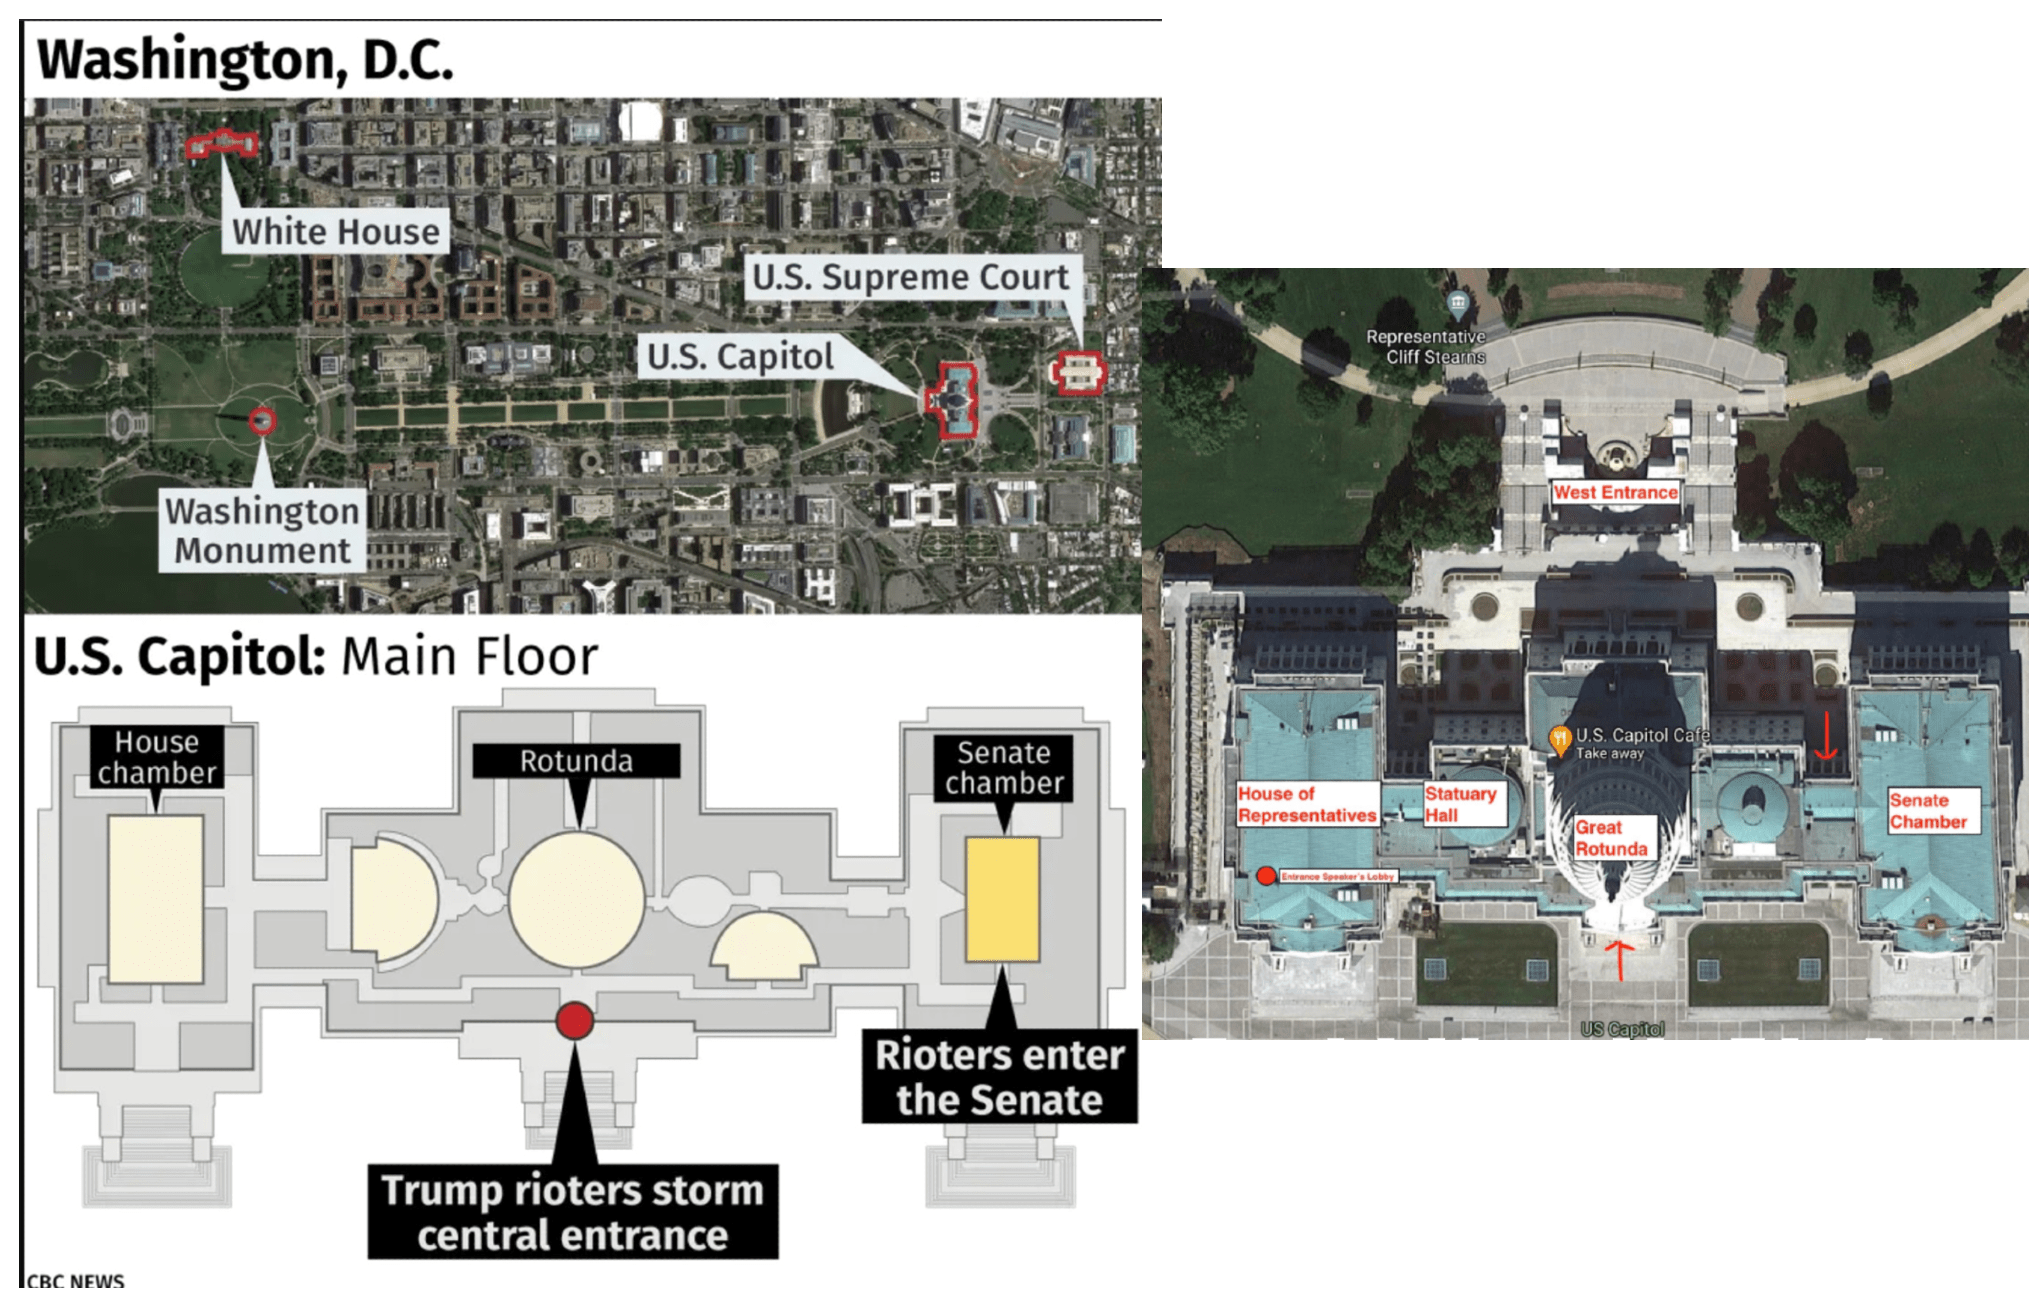 A set of google maps screenshots with landmark references and a map of the U.S. Capitol